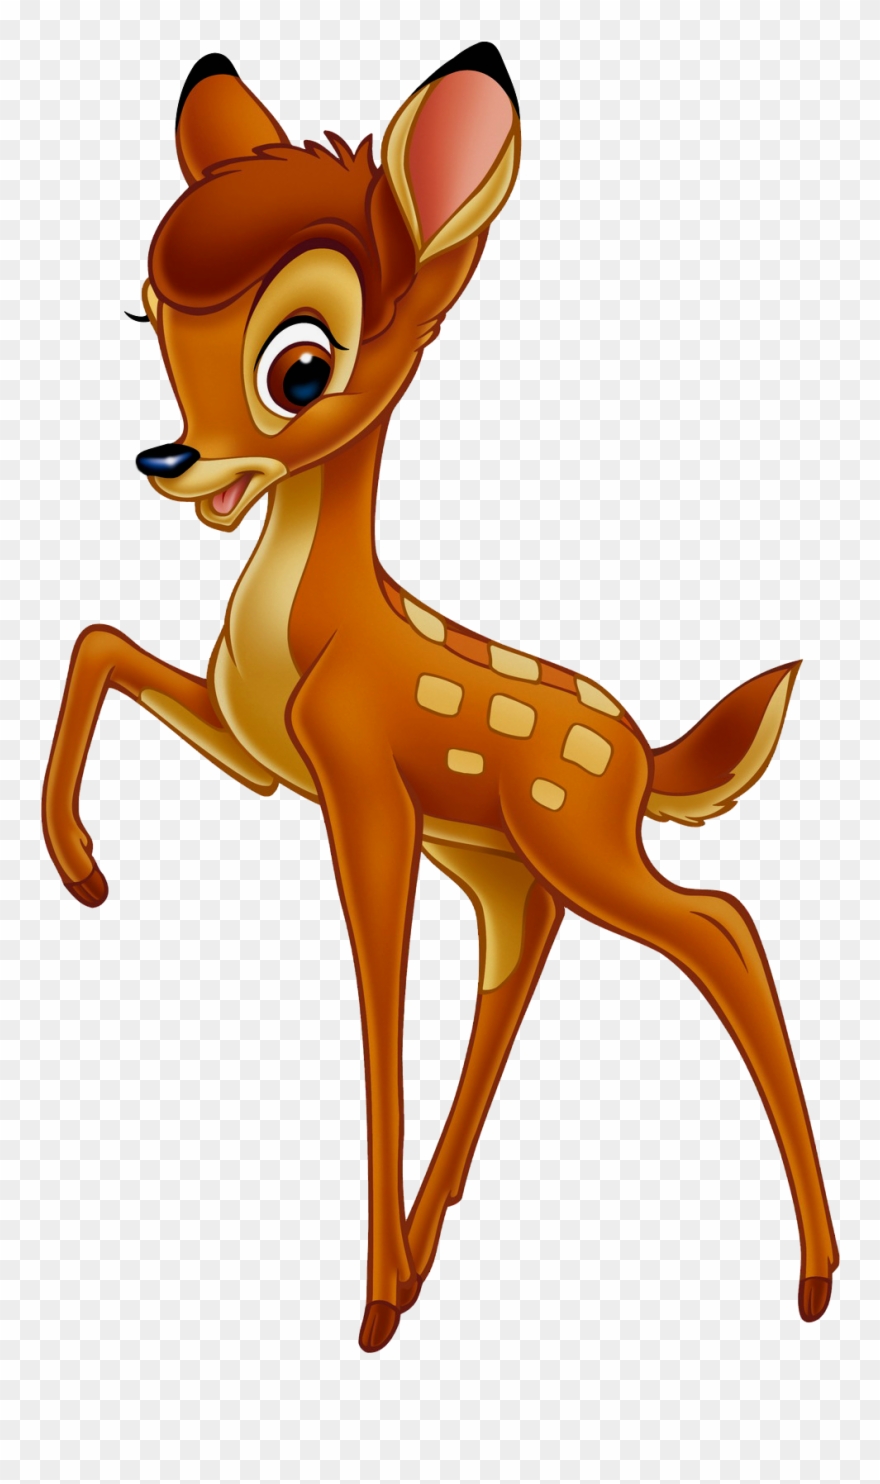 Bambi Is The Protagonist Of Disney\'s 1942 Animated.